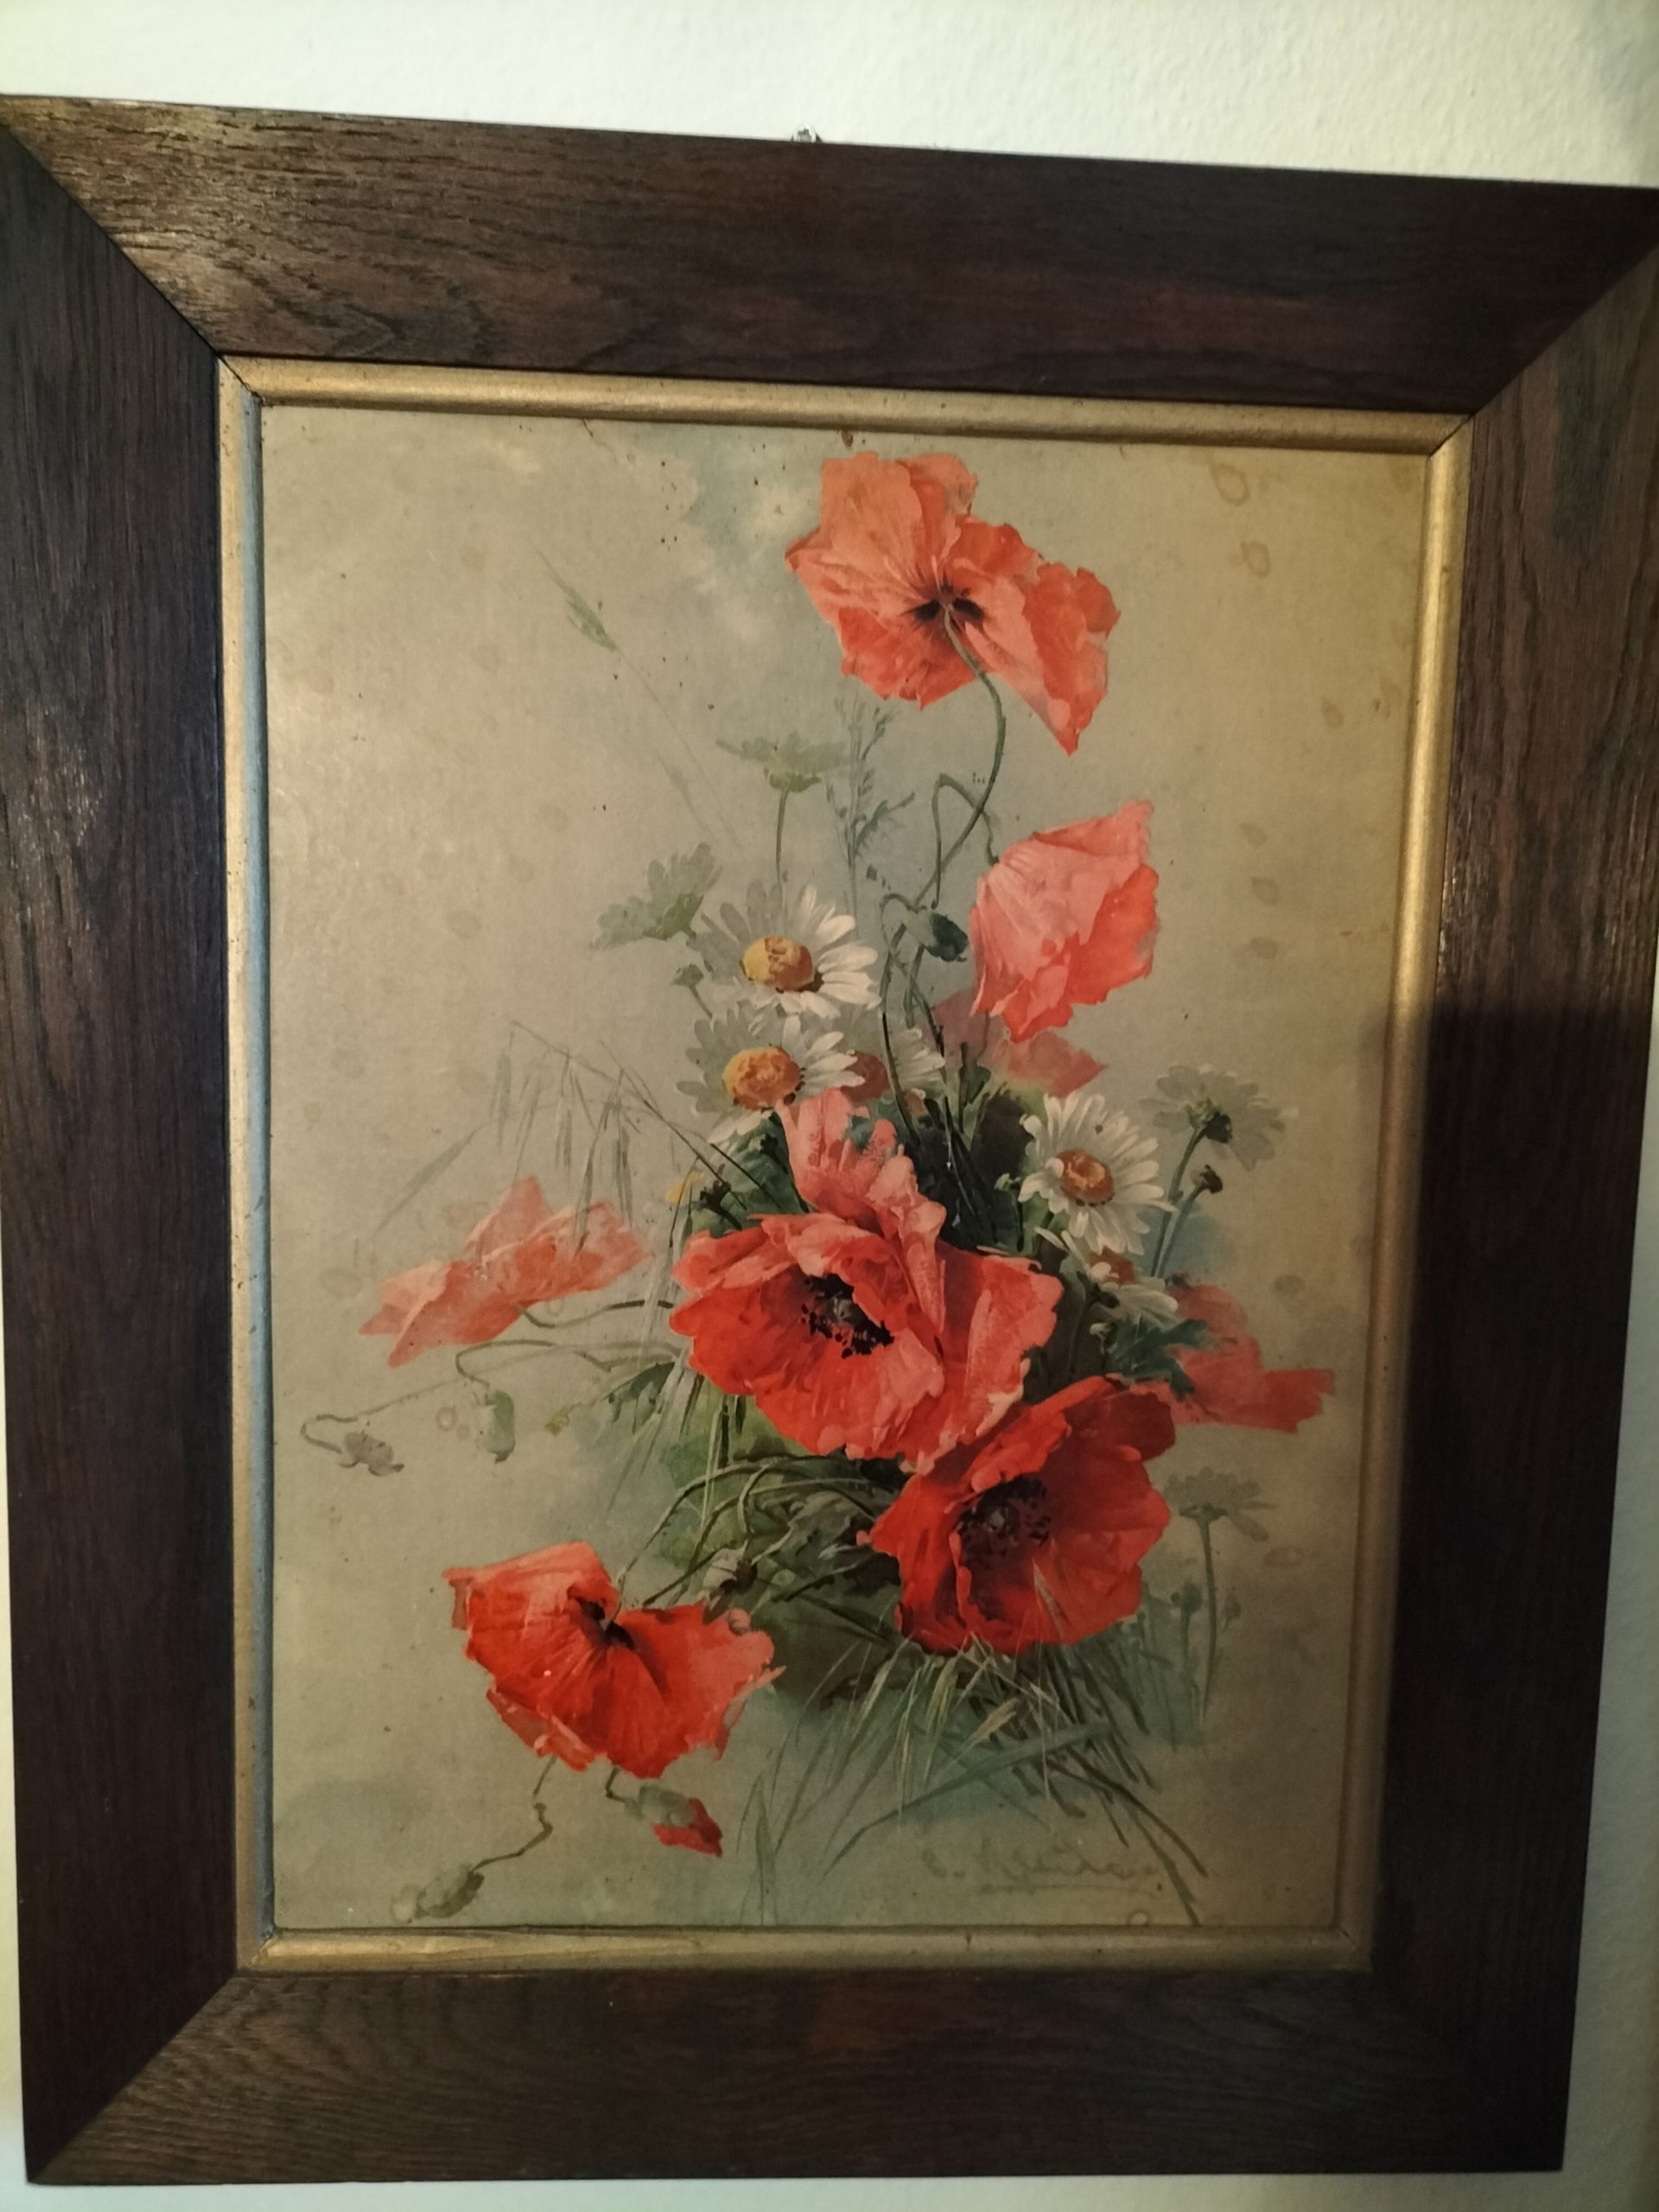 Please identify painting